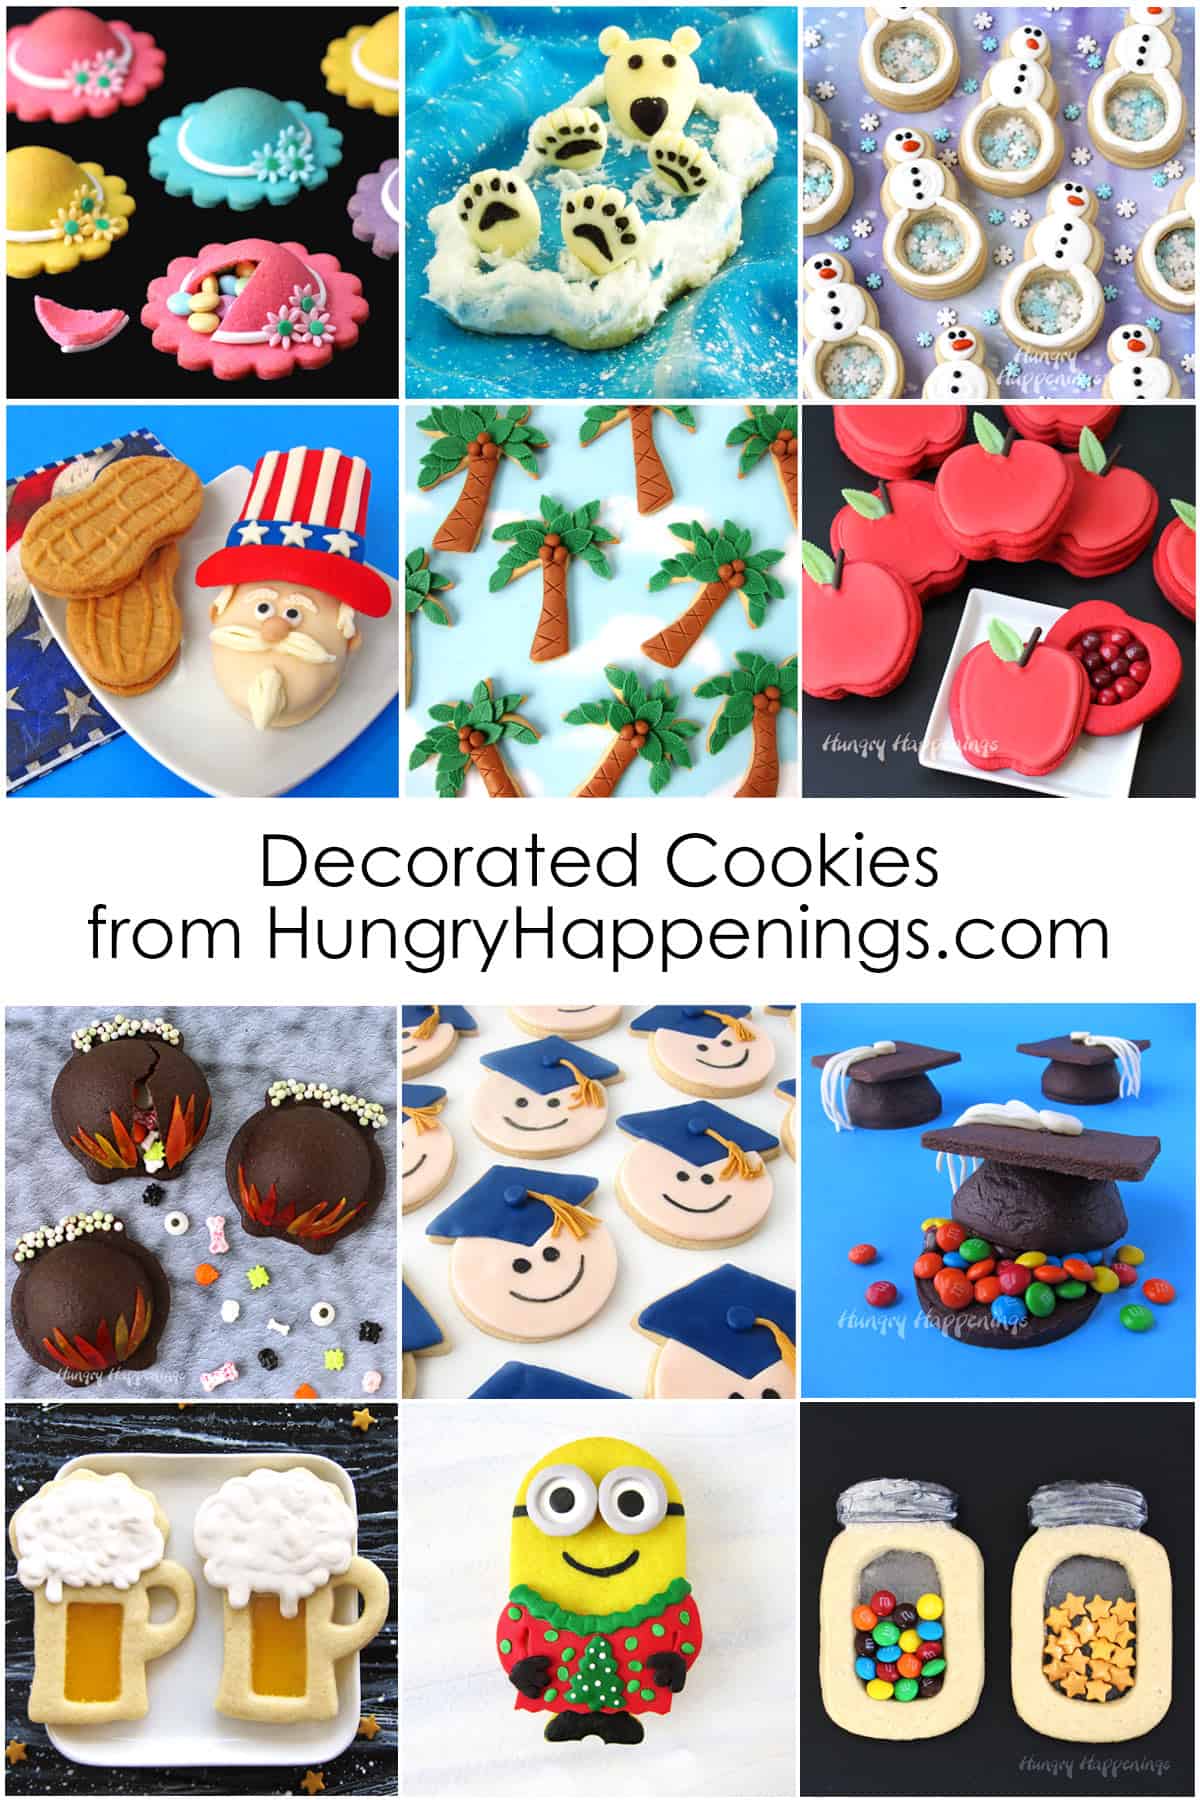 Decorated cookies from Hungry Happenings including Ladies Hat Cookies, Polar Bear Cookies, Snowman Cookies, Palm Tree Cookies, Graduation Cookies, Minion Cookies, and more.